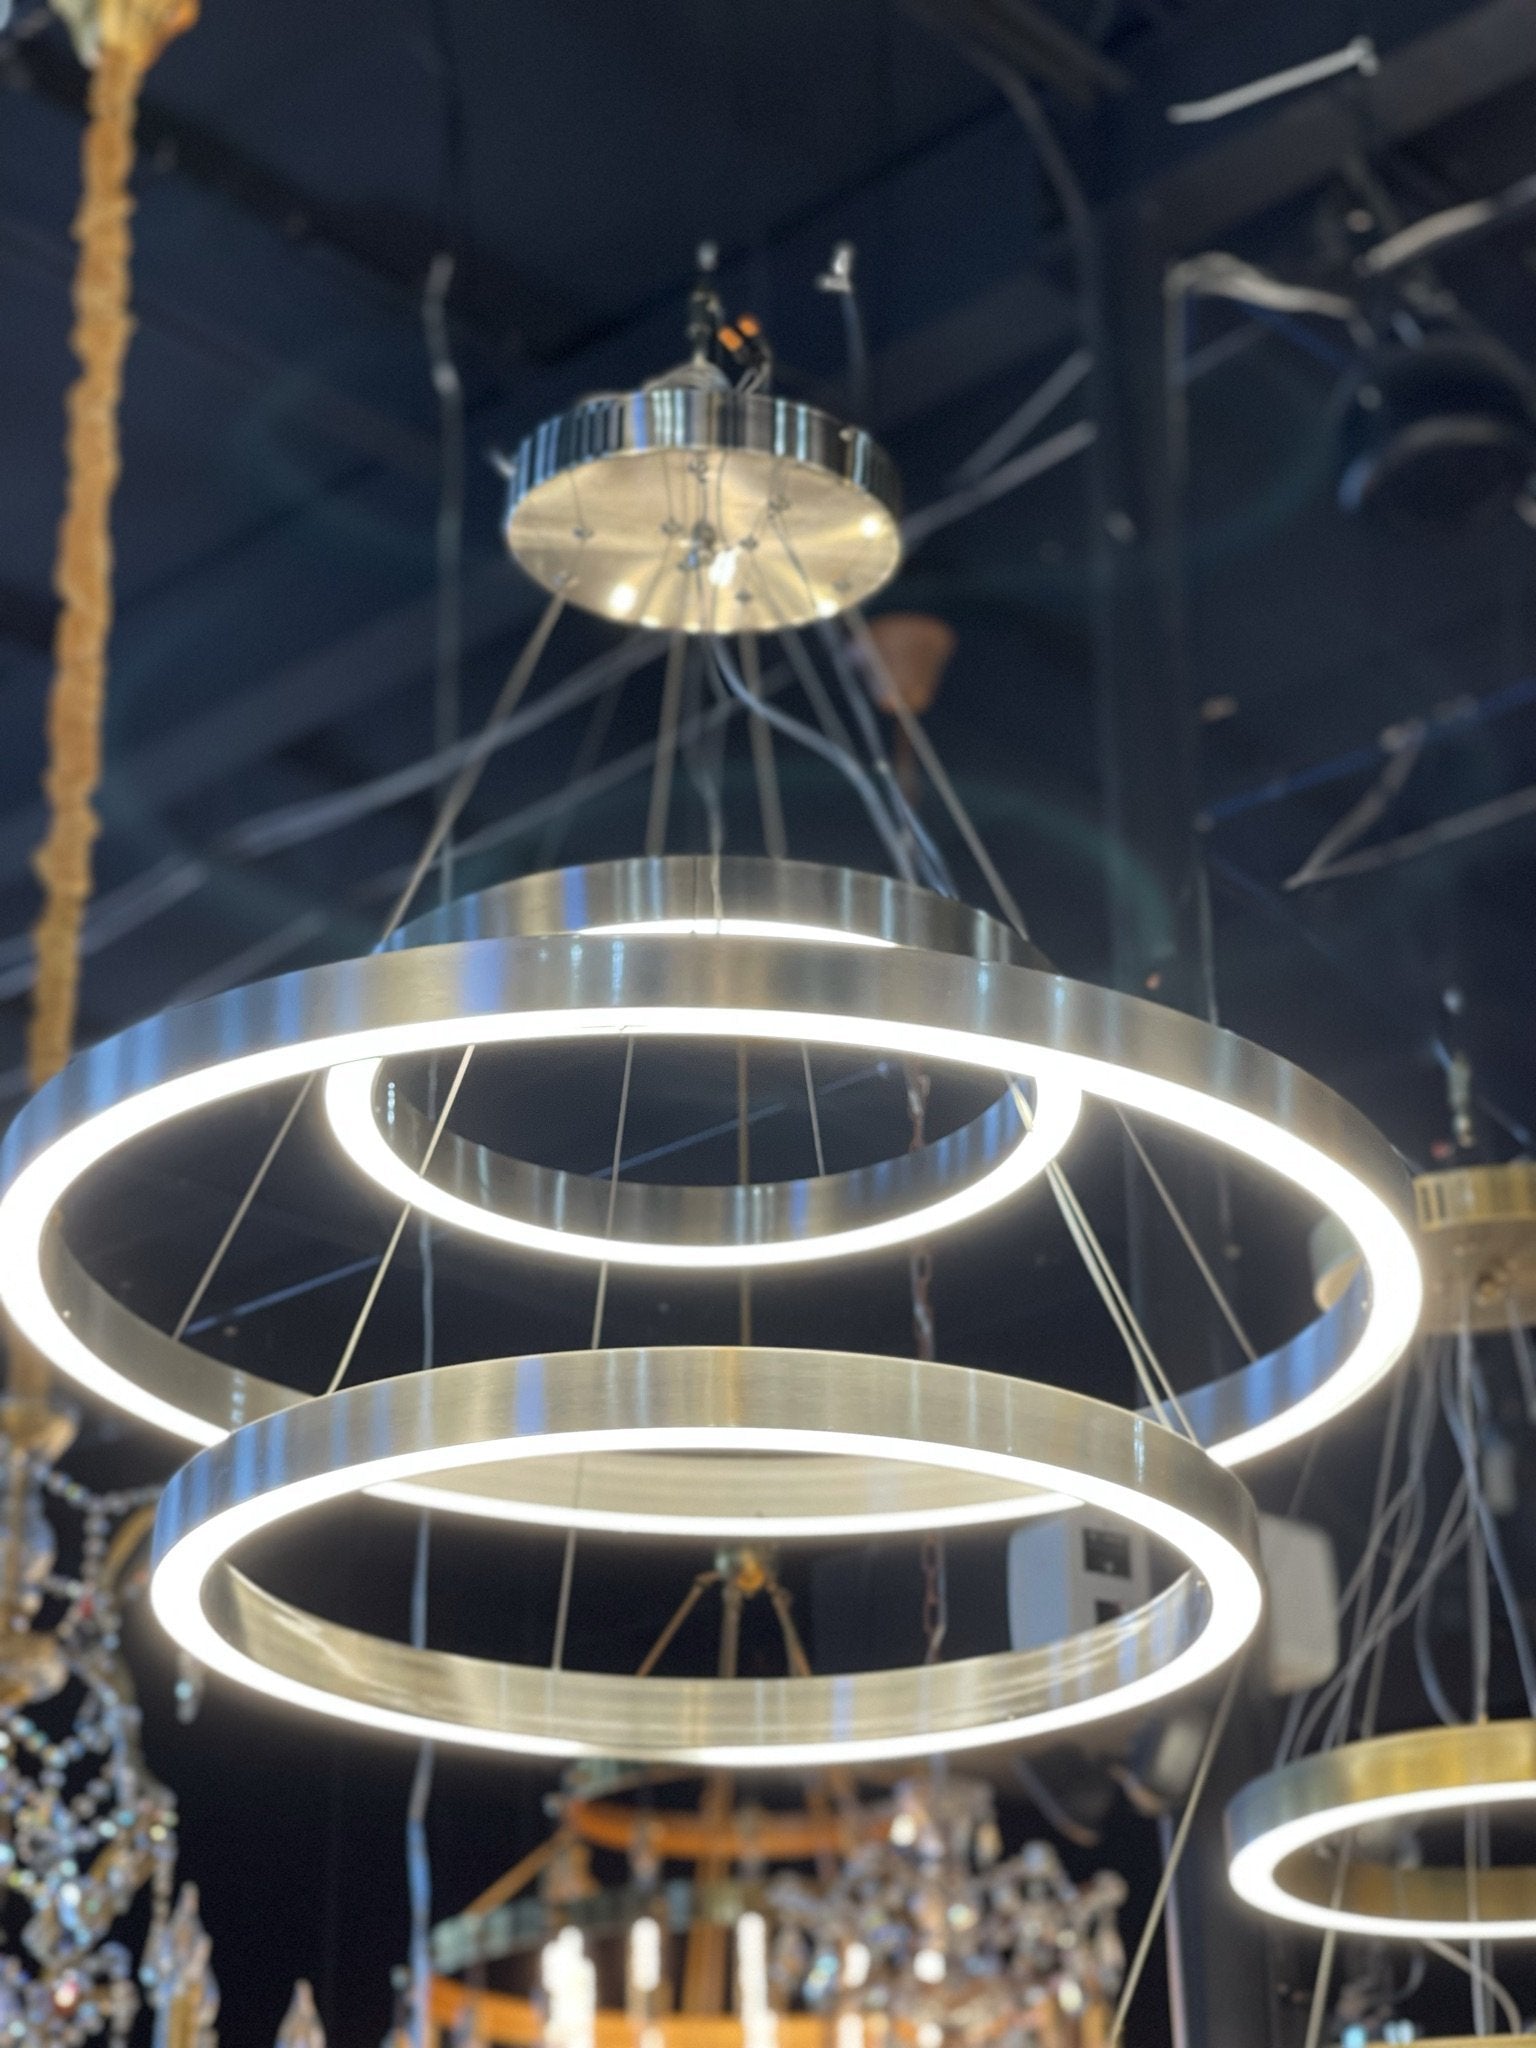 Ancillary 3-Ring LED Chandelier - Italian Concept - 